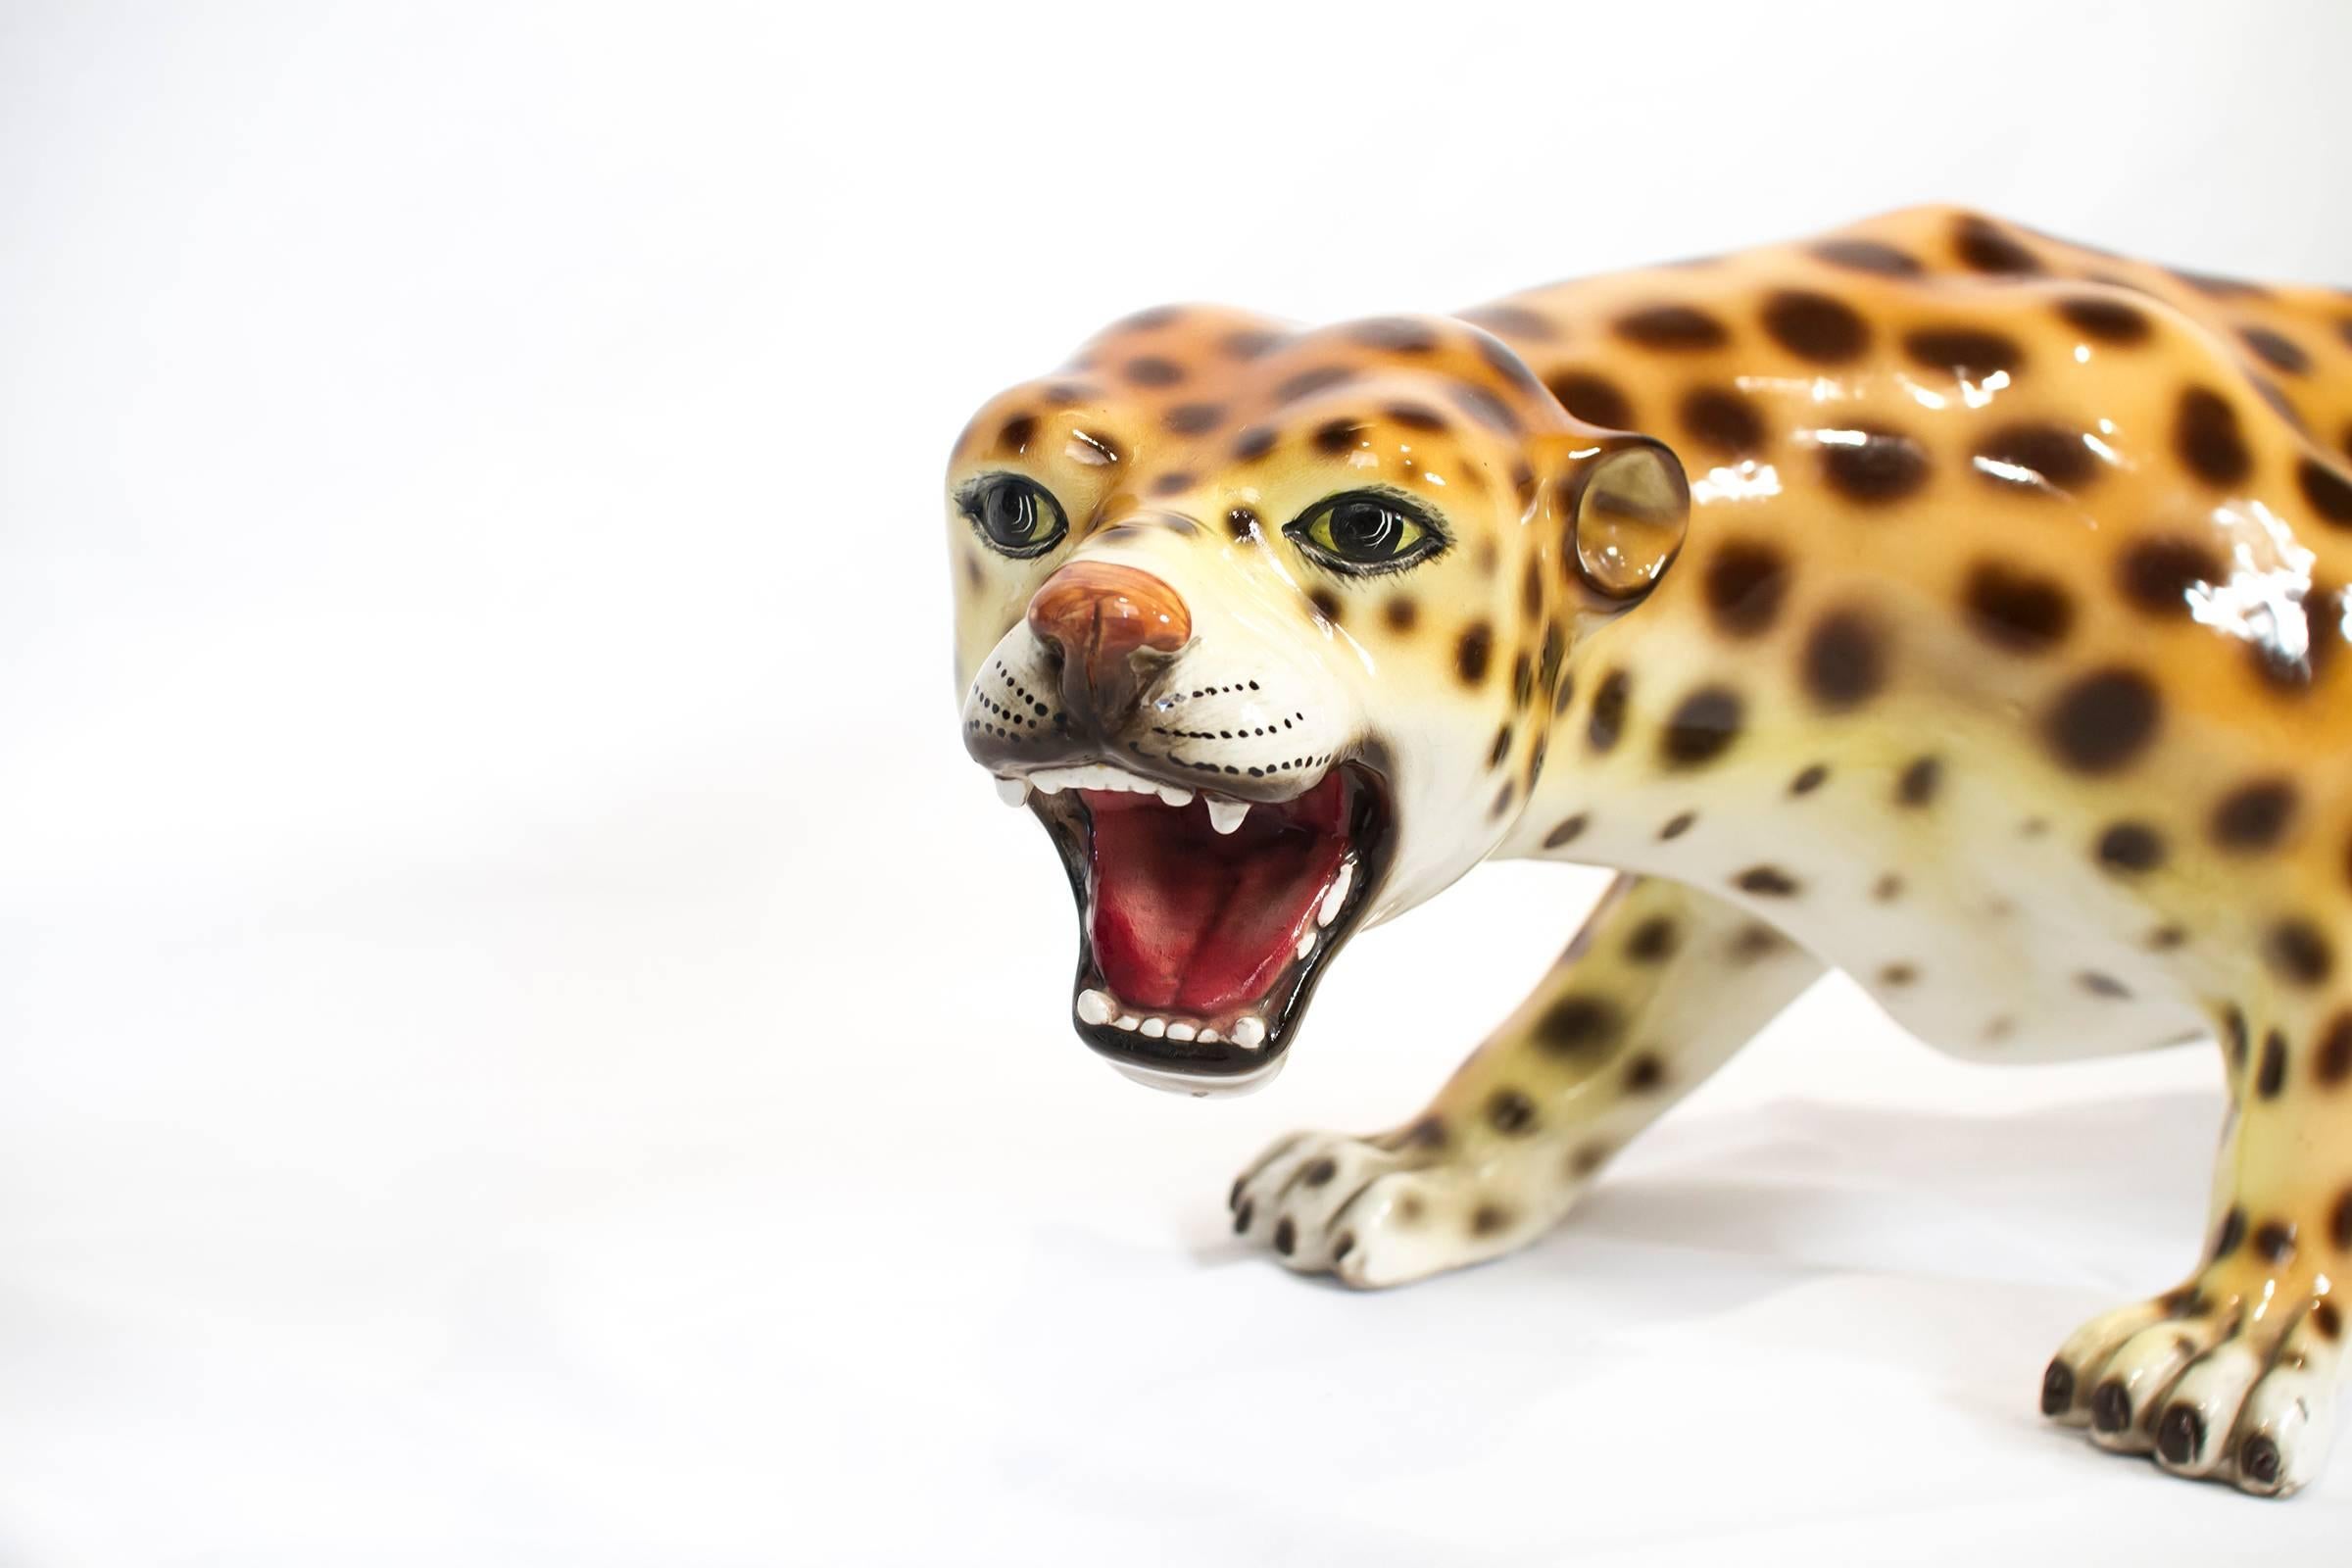 Marvelous and rare Italian cheetah ceramic sculpture in attack position, 1970s.

Please look at our storefront page to browse our entire collection.
Please contact us for delivery details.